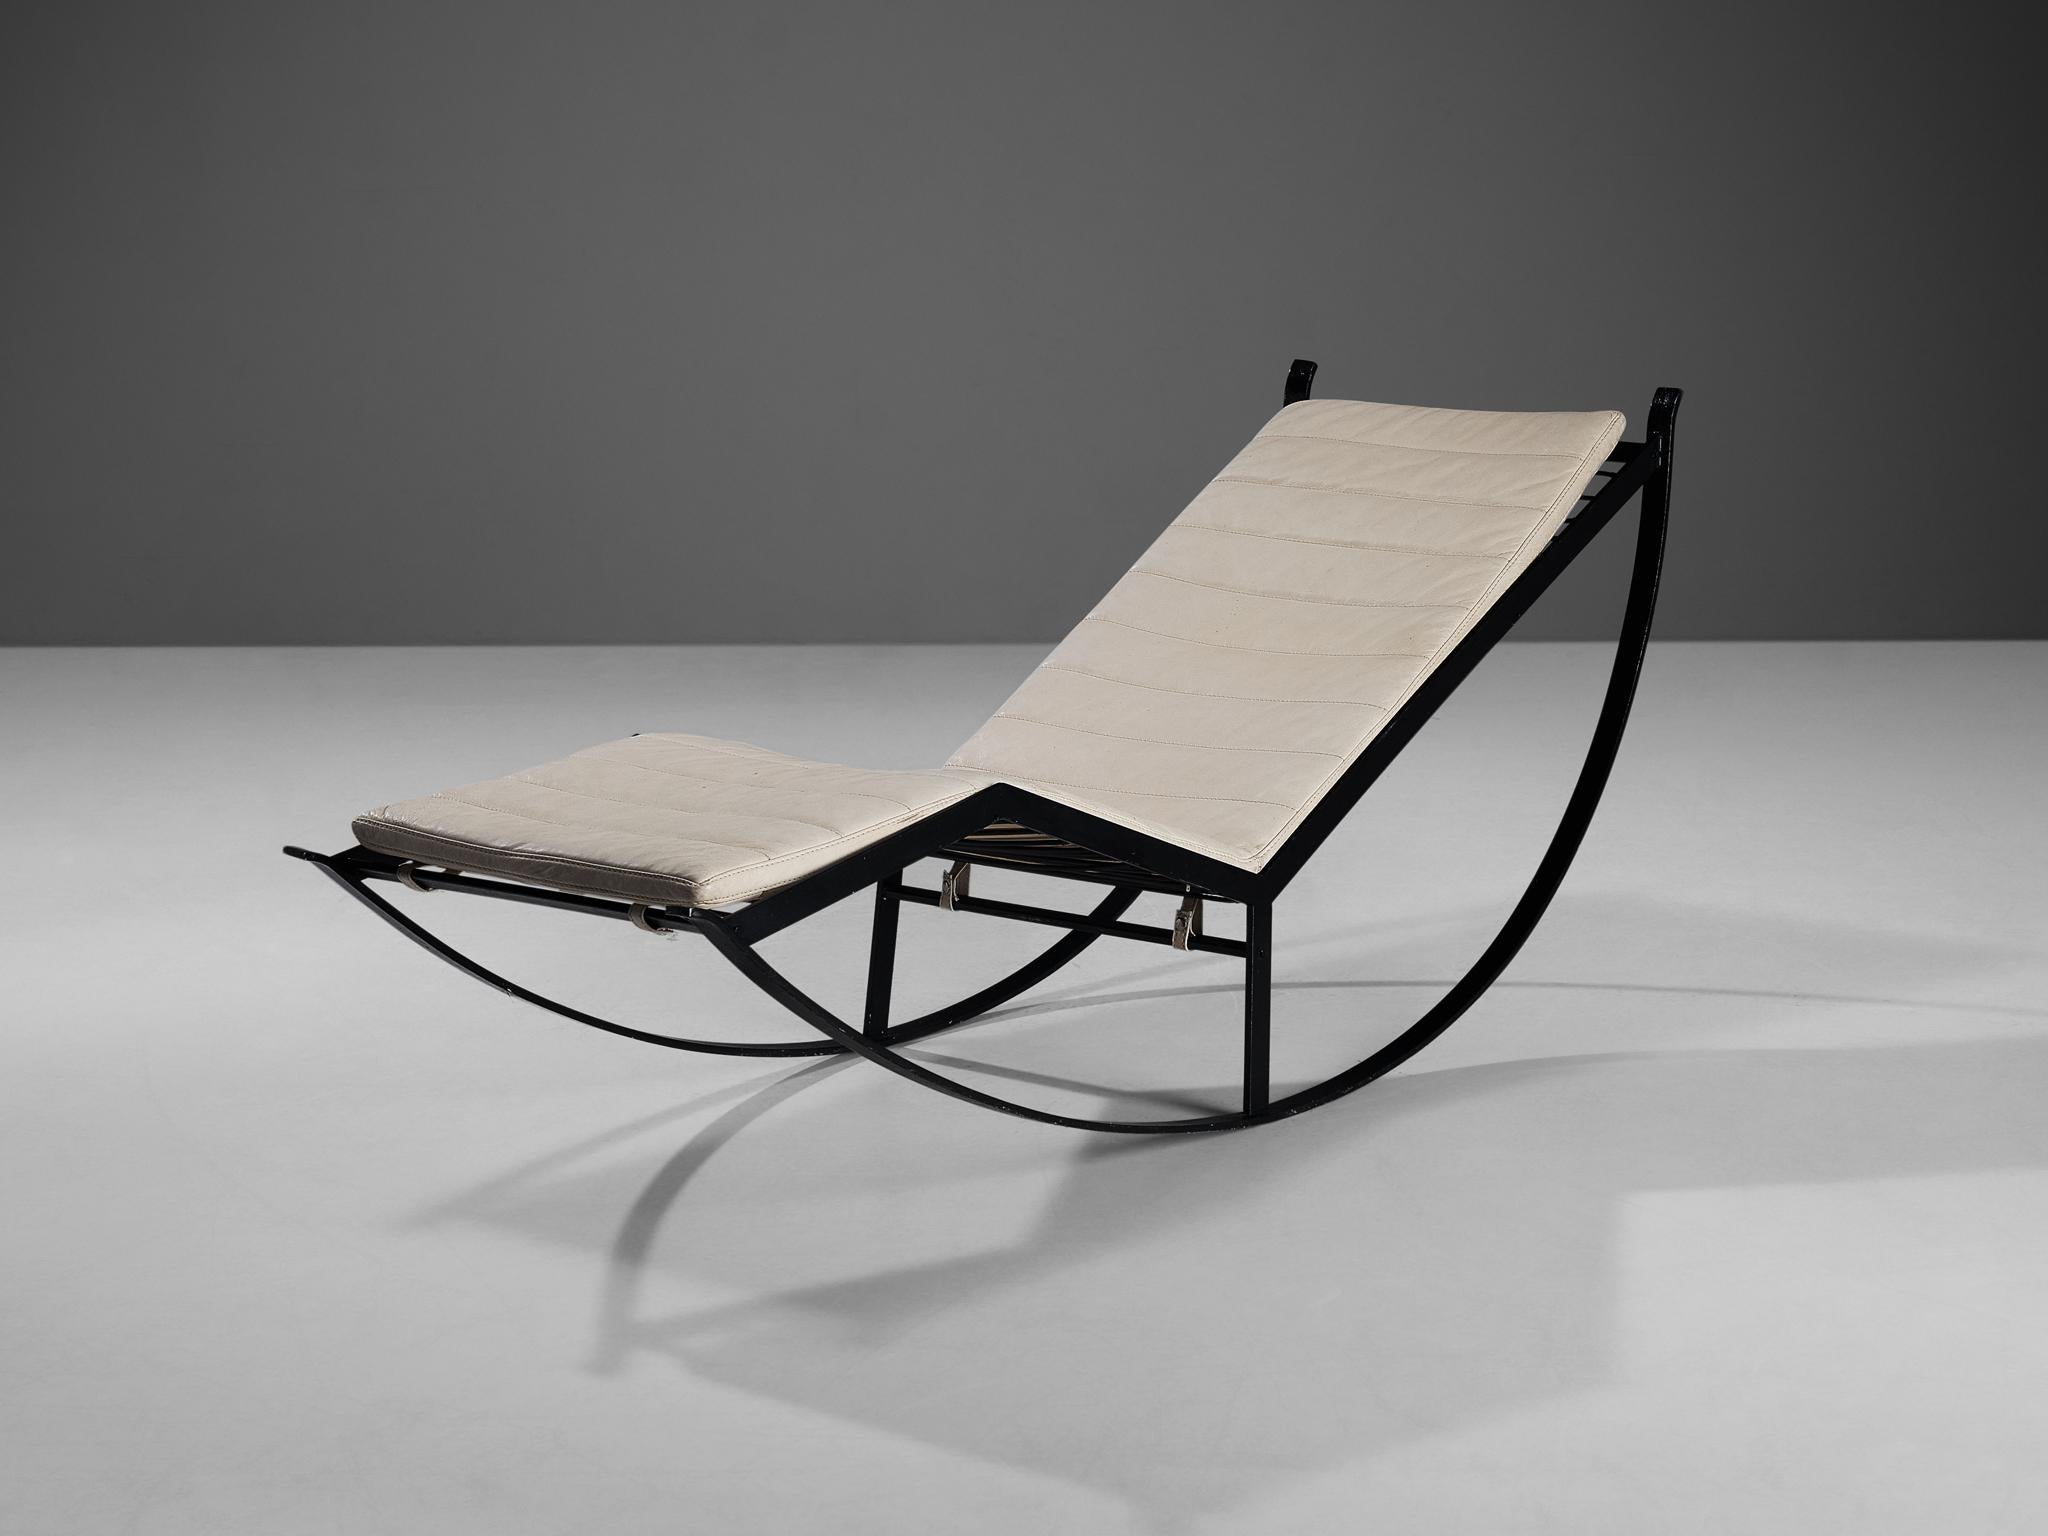 Attributed to Willy Rizzo, rocking chair, lacquered steel, leather, rubber rope, Italy, late 1960s

This unique rocking chair by Willy Rizzo hardly ever presents itself on the market. This piece was first seen in the living room of his own holiday